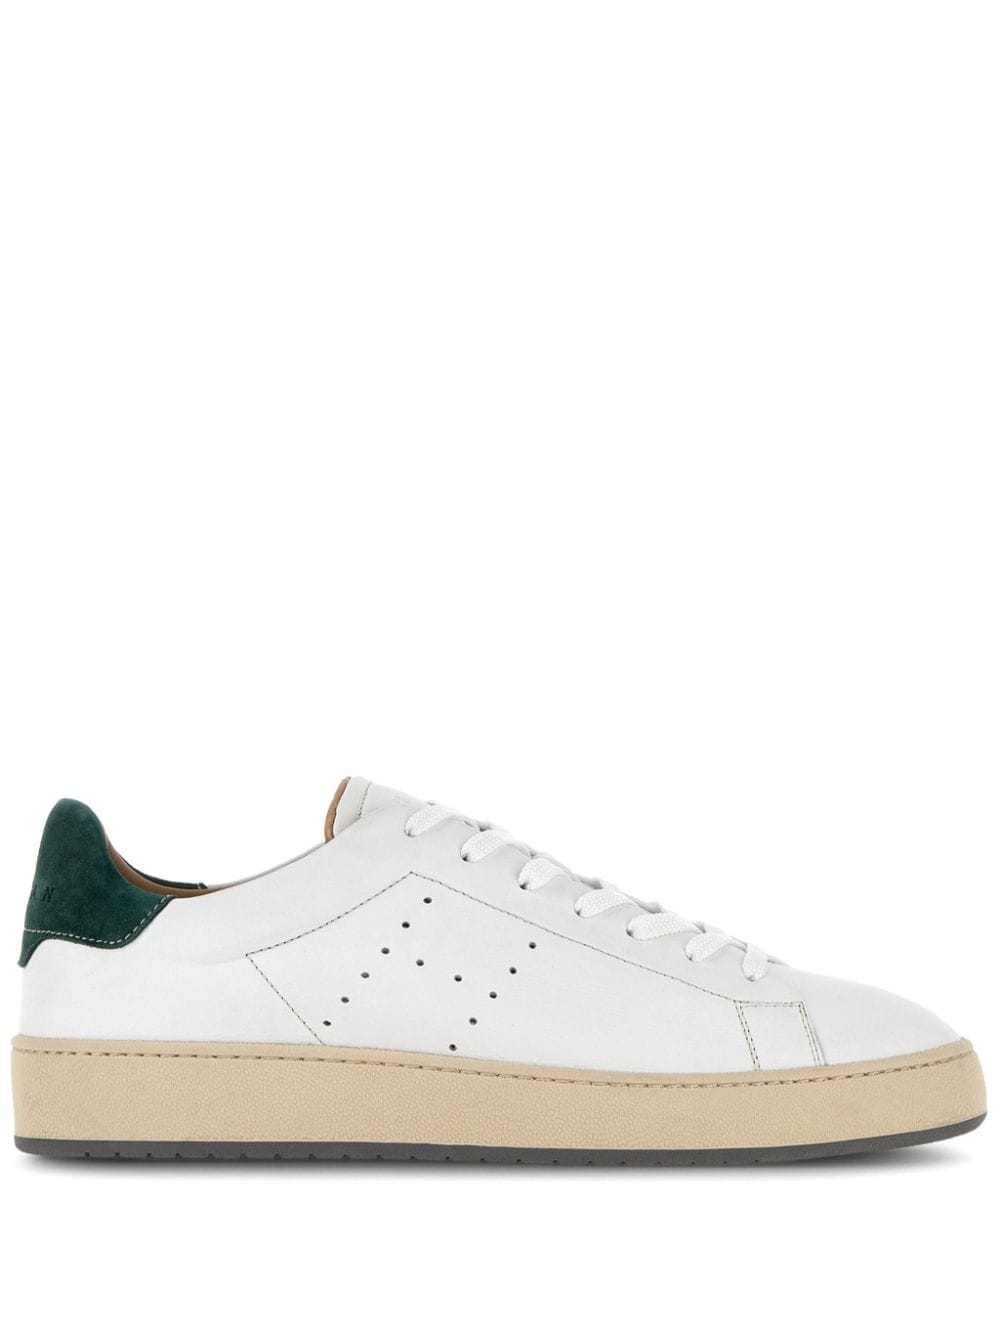 Hogan H672 leather low-top sneakers White